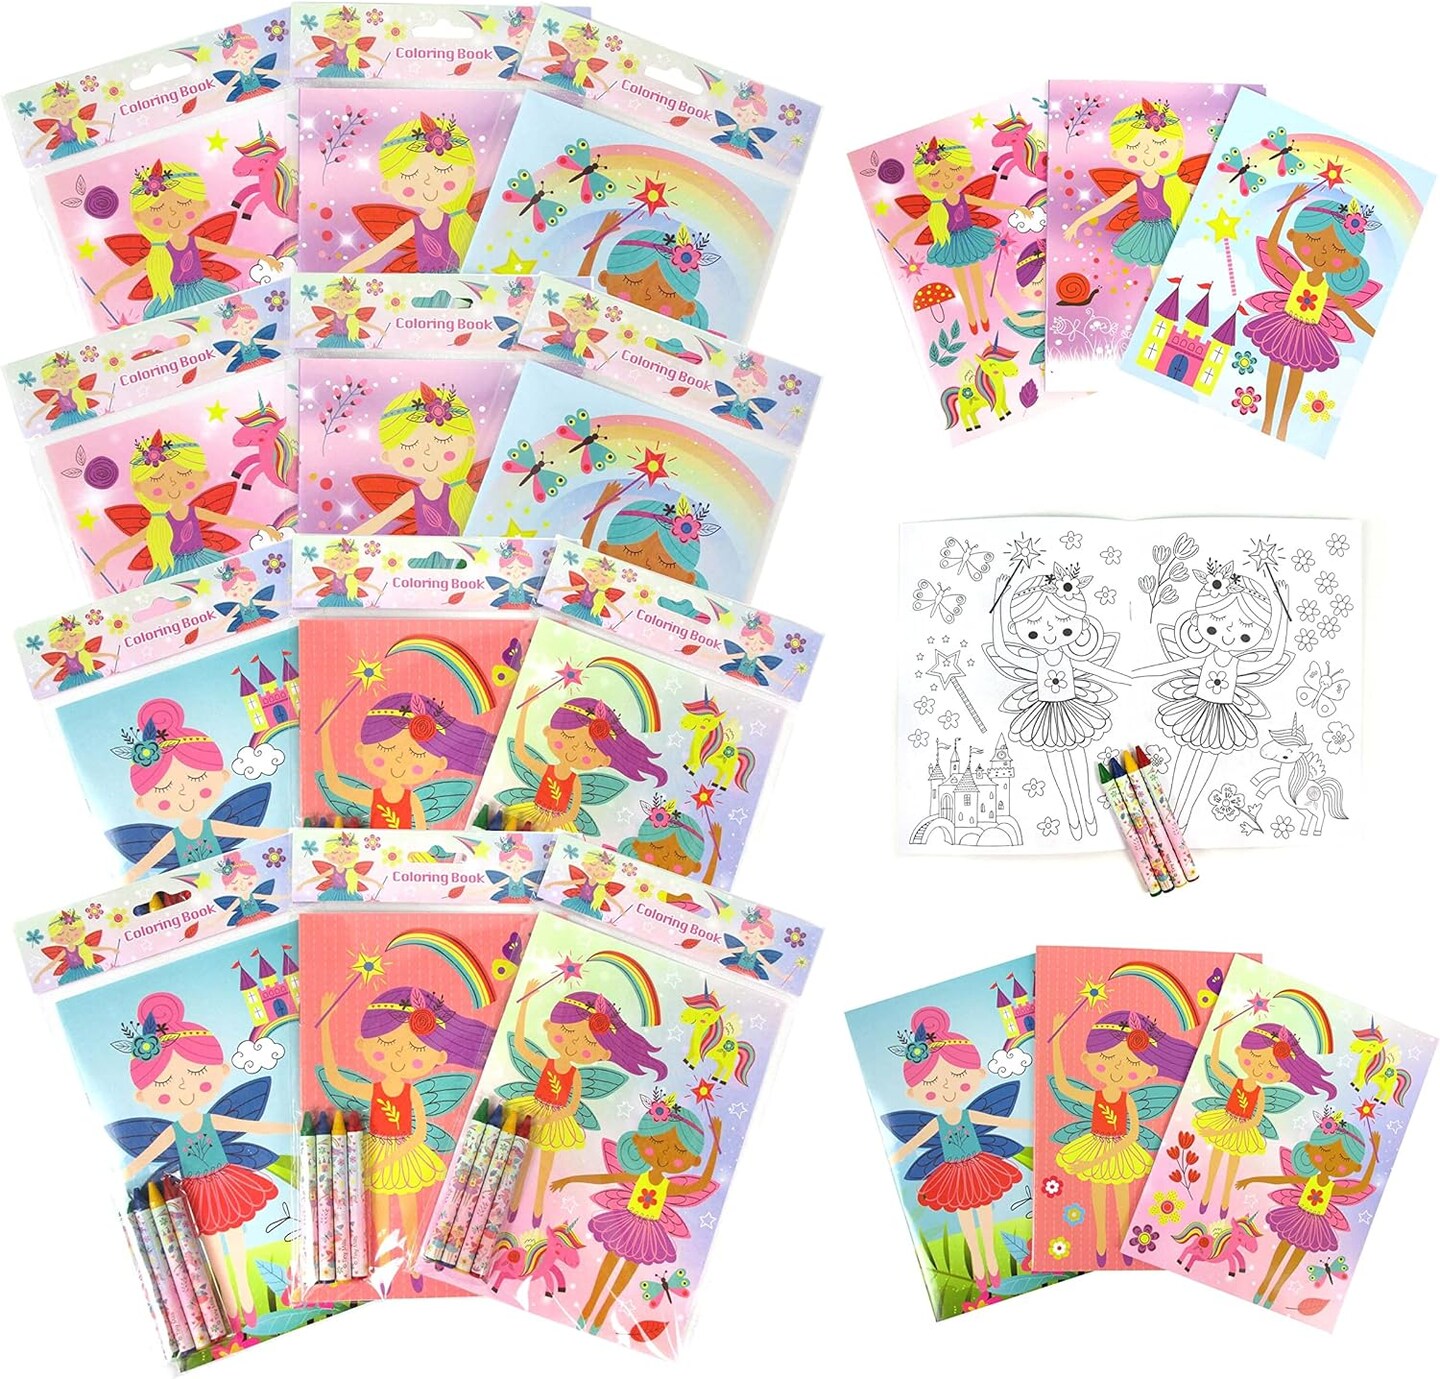 TINYMILLS Magical Fairies Coloring Books for Kids with 12 Coloring Books and 48 Crayons